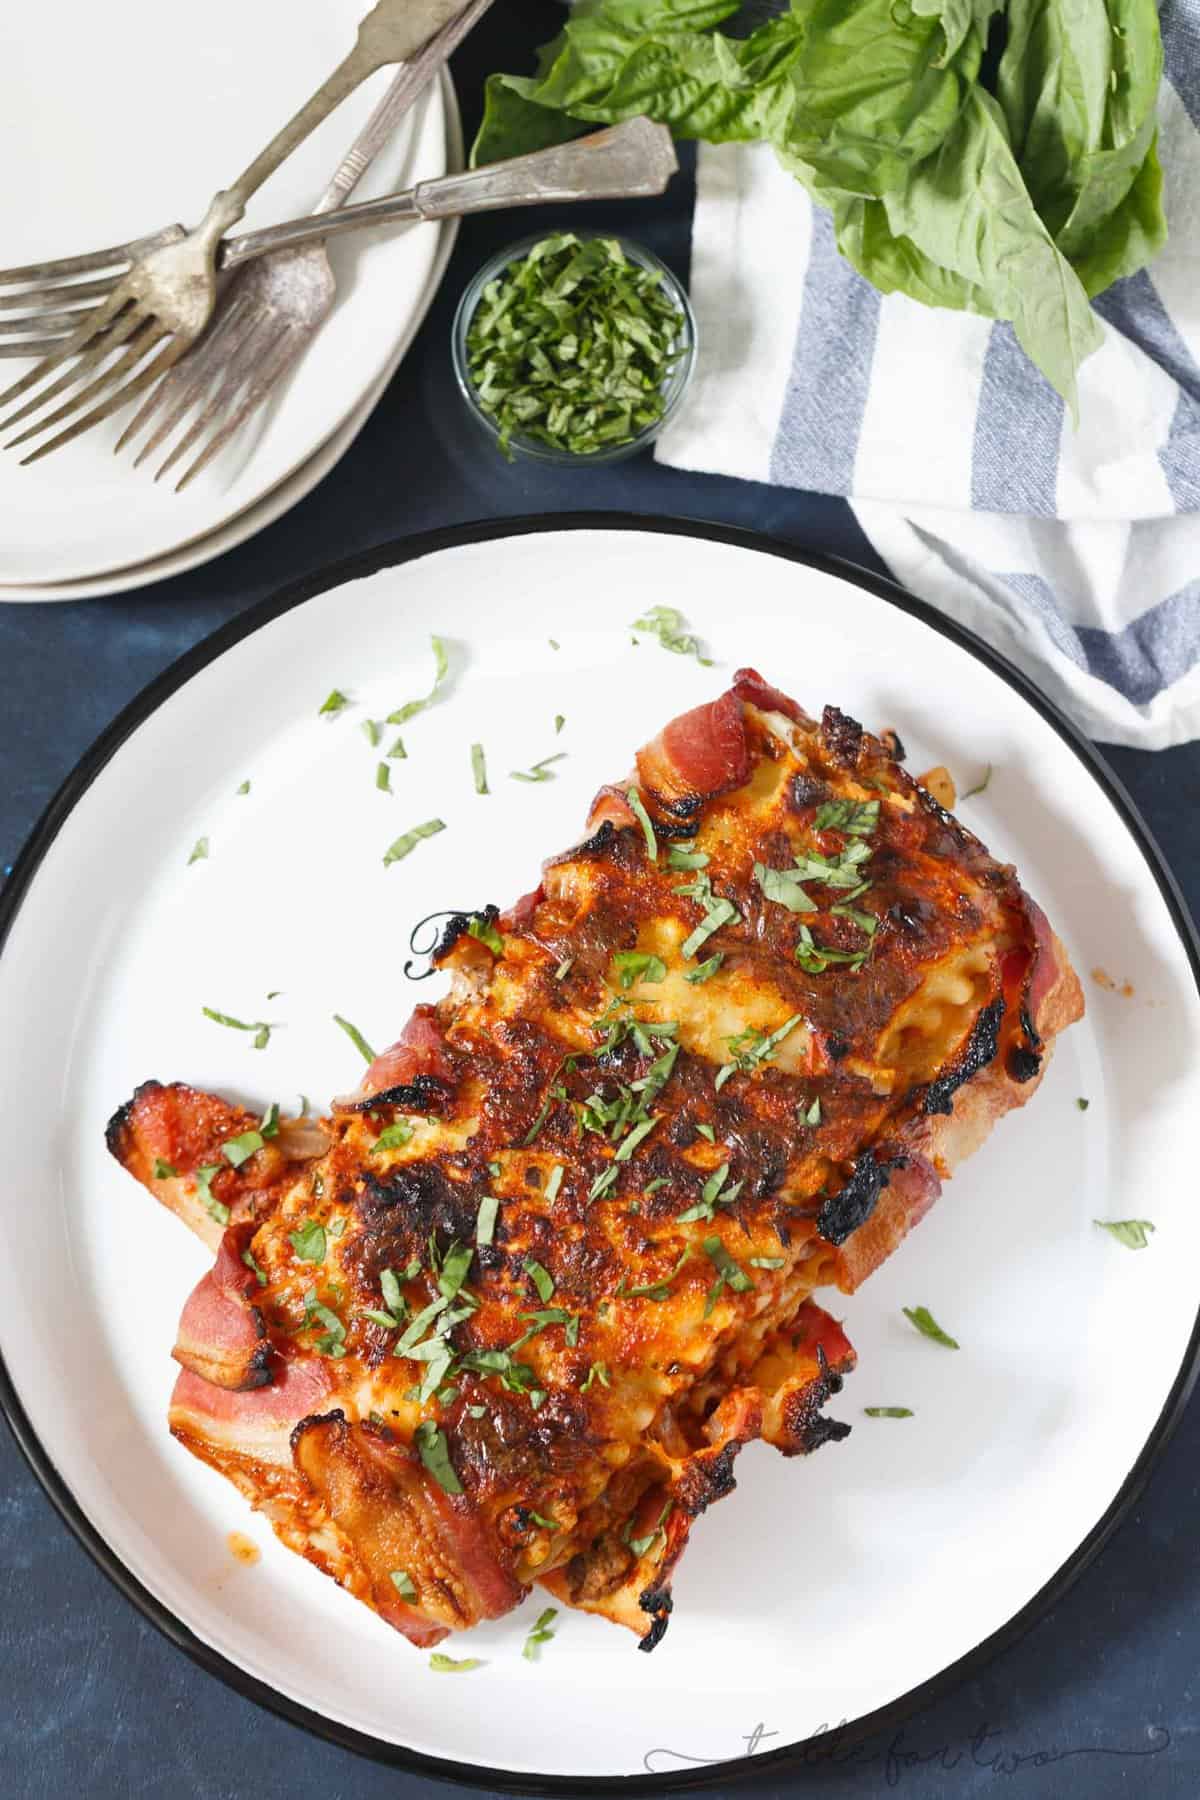 Who could say no to bacon wrapped lasagna? Once you have a bite of this, you will won't want to make lasagna any other way! This is such an awesome, decadent spin on the classic and traditional lasagna!